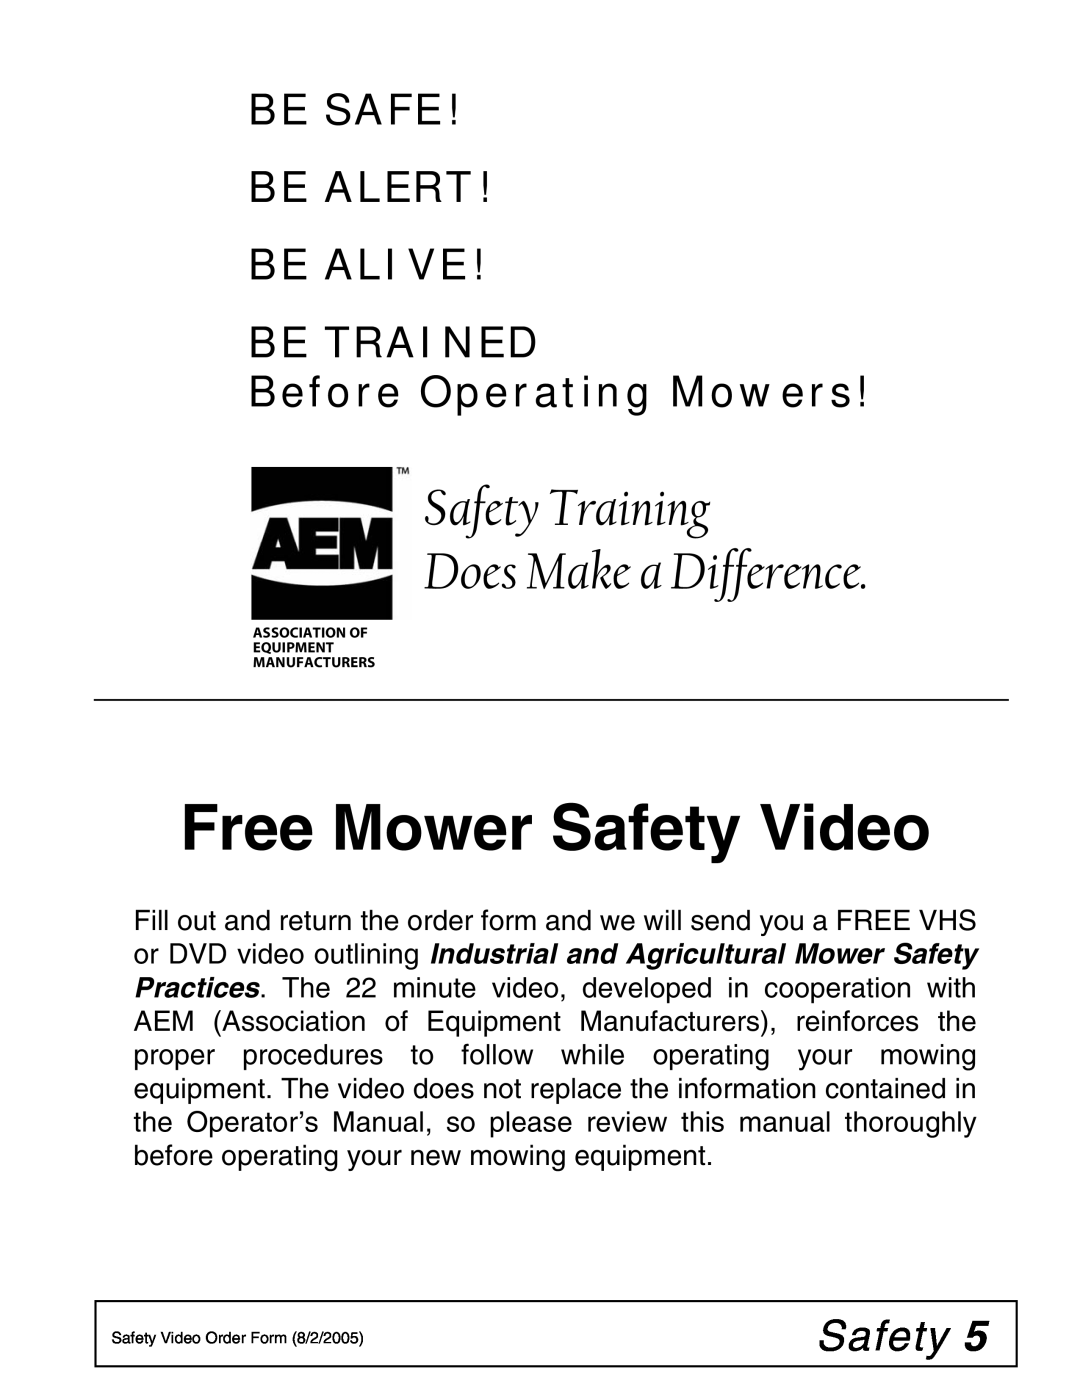 Woods Equipment BW180XHD Free Mower Safety Video, Safety Training Does Make a Difference, Before Operating Mowers 